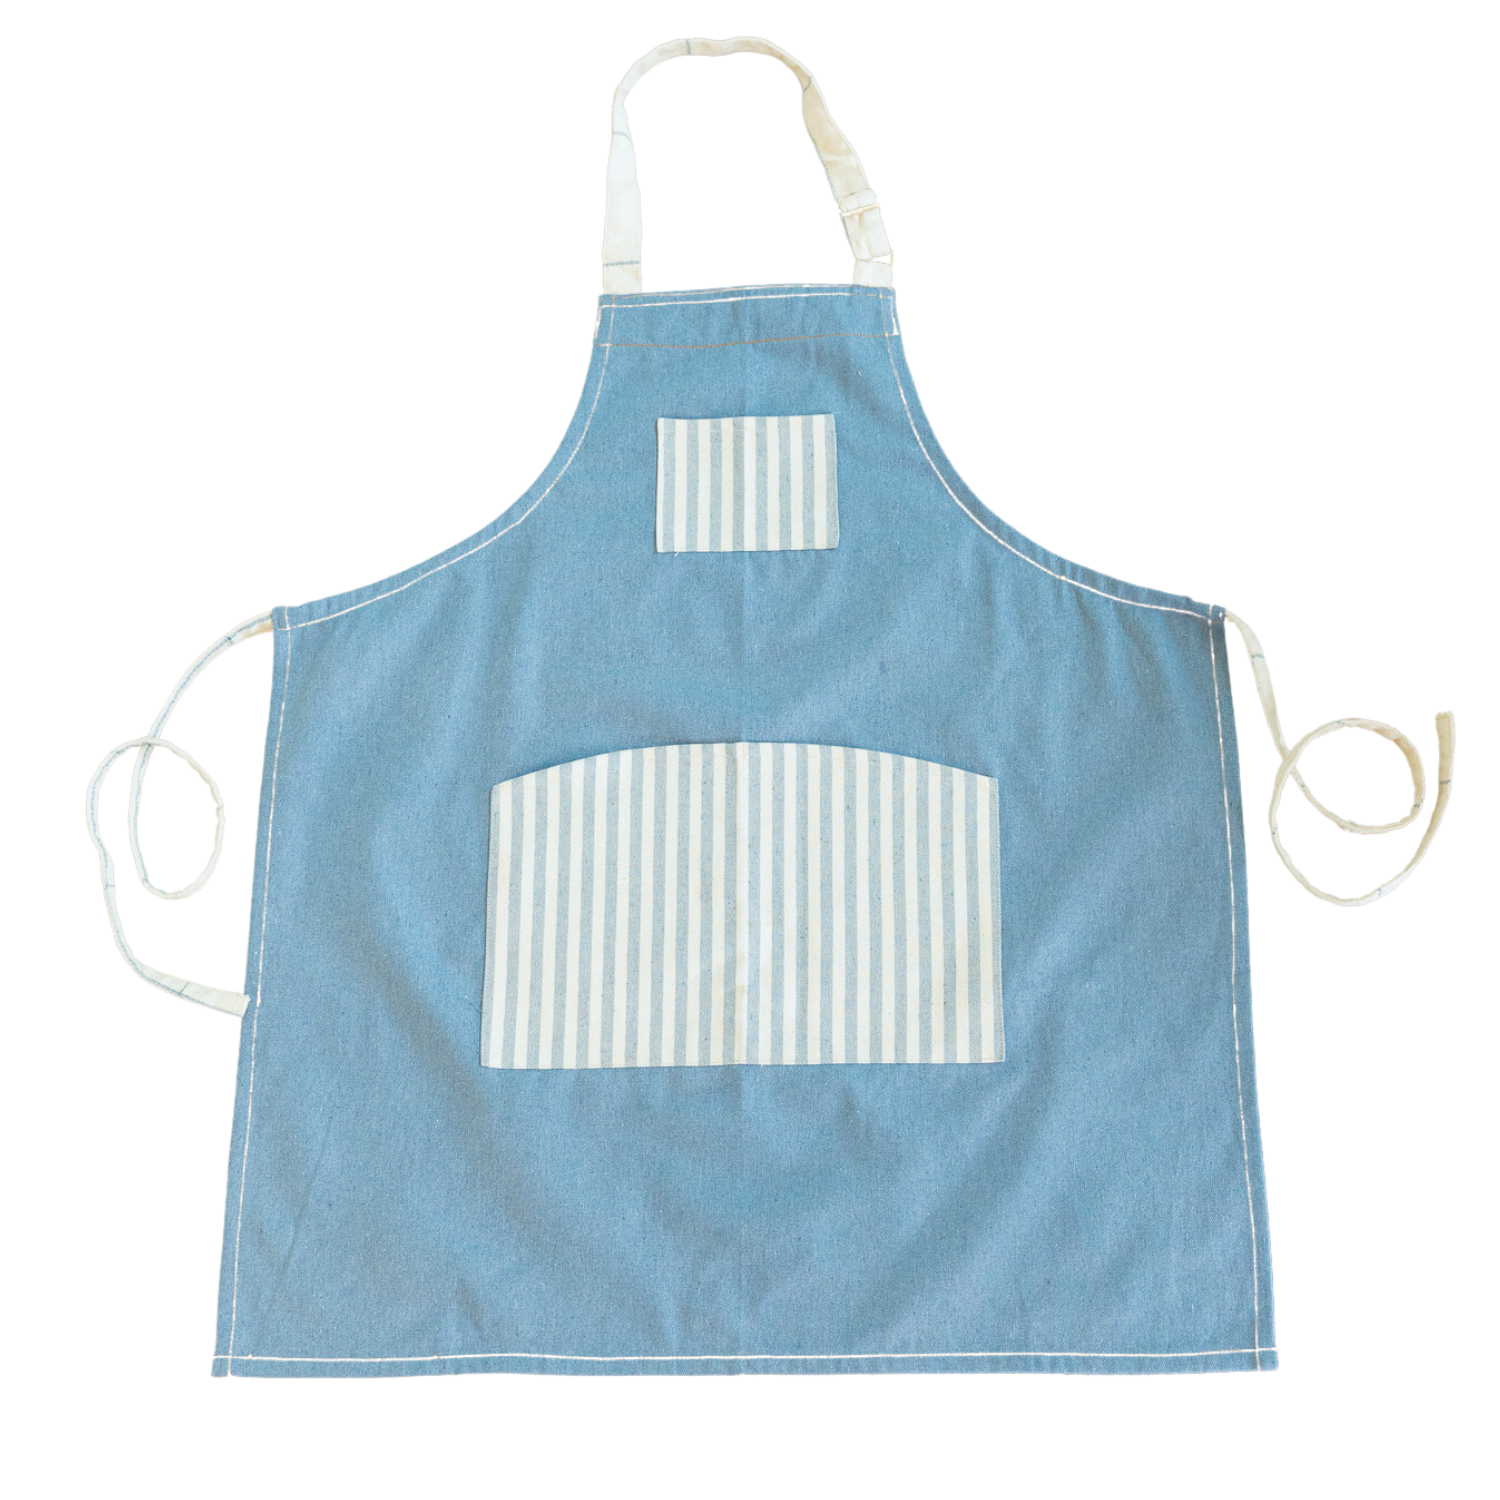 Jewelry Apron | Jeweler's Bench Apron with 3 Pockets